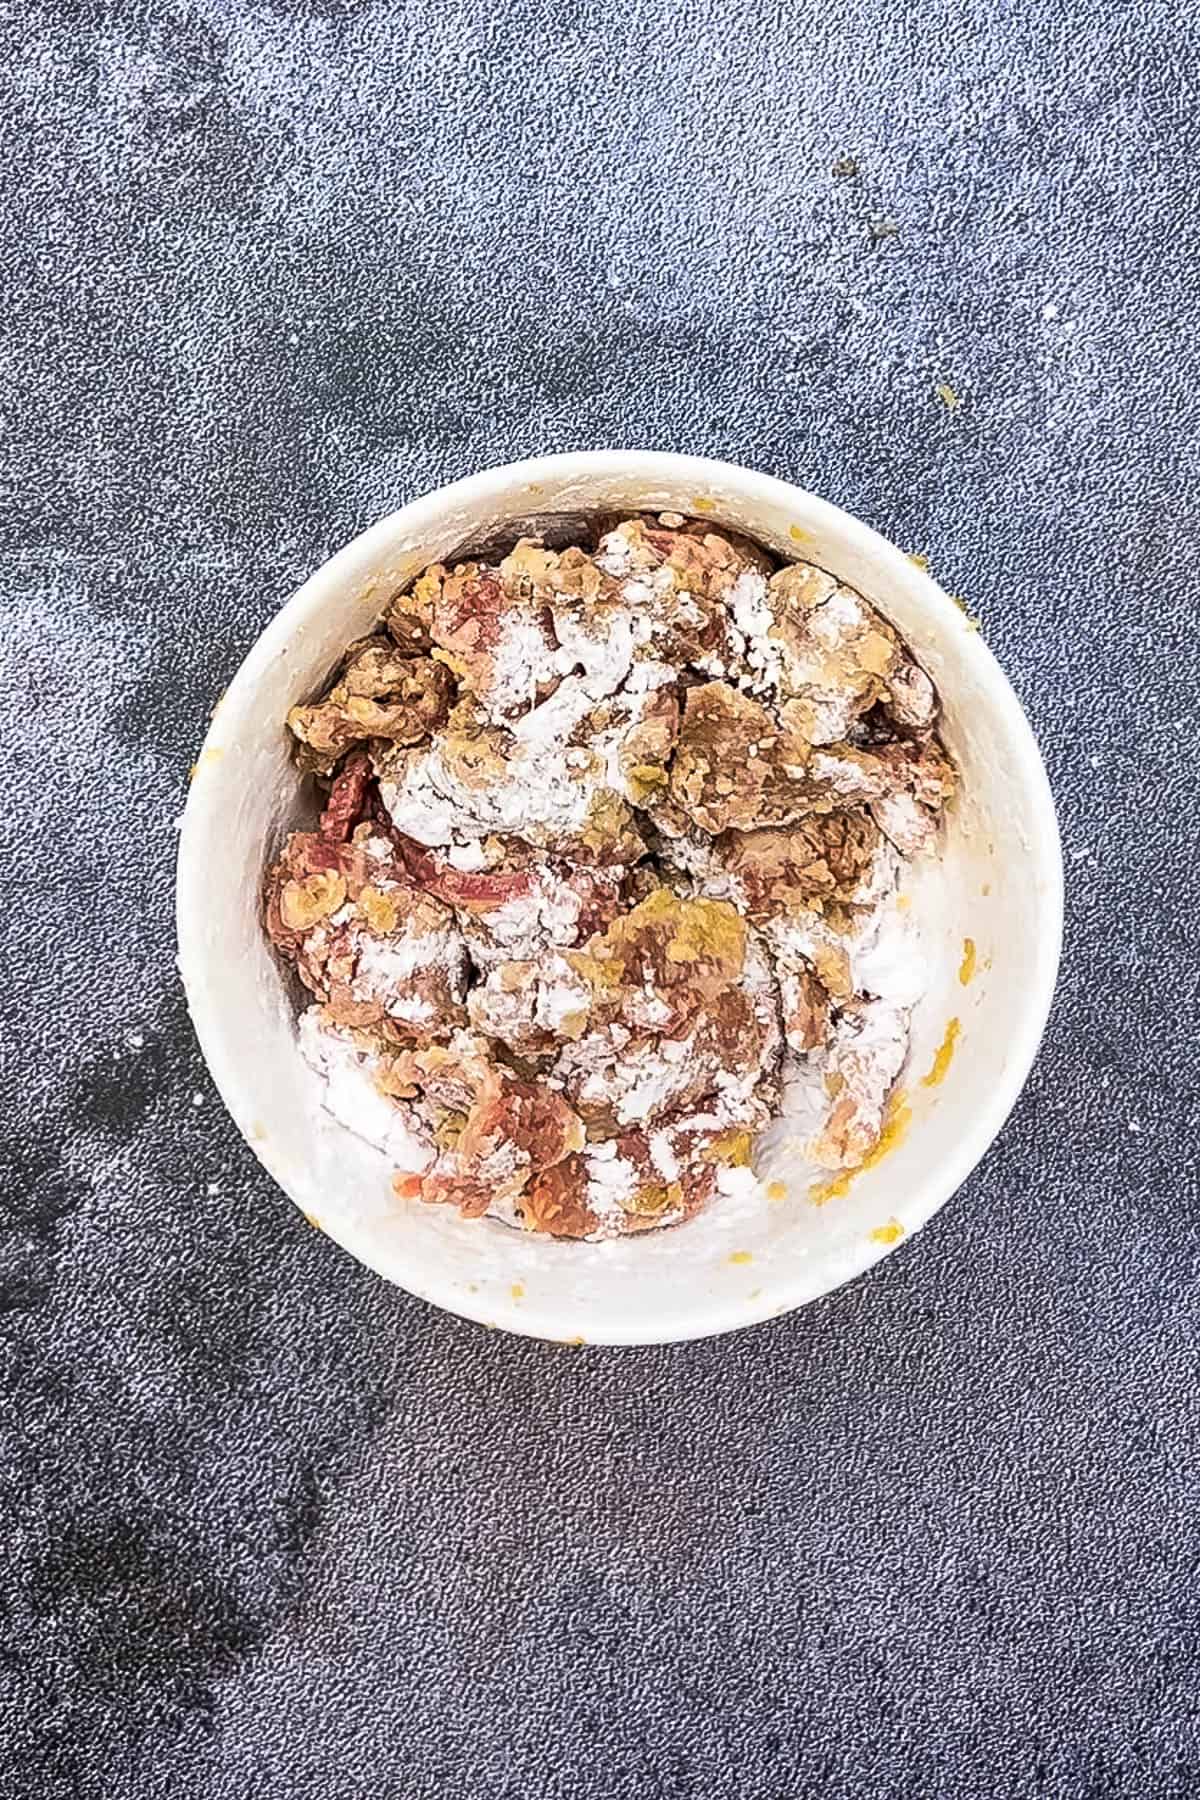 A bowl of crispy food with powdered sugar on top.